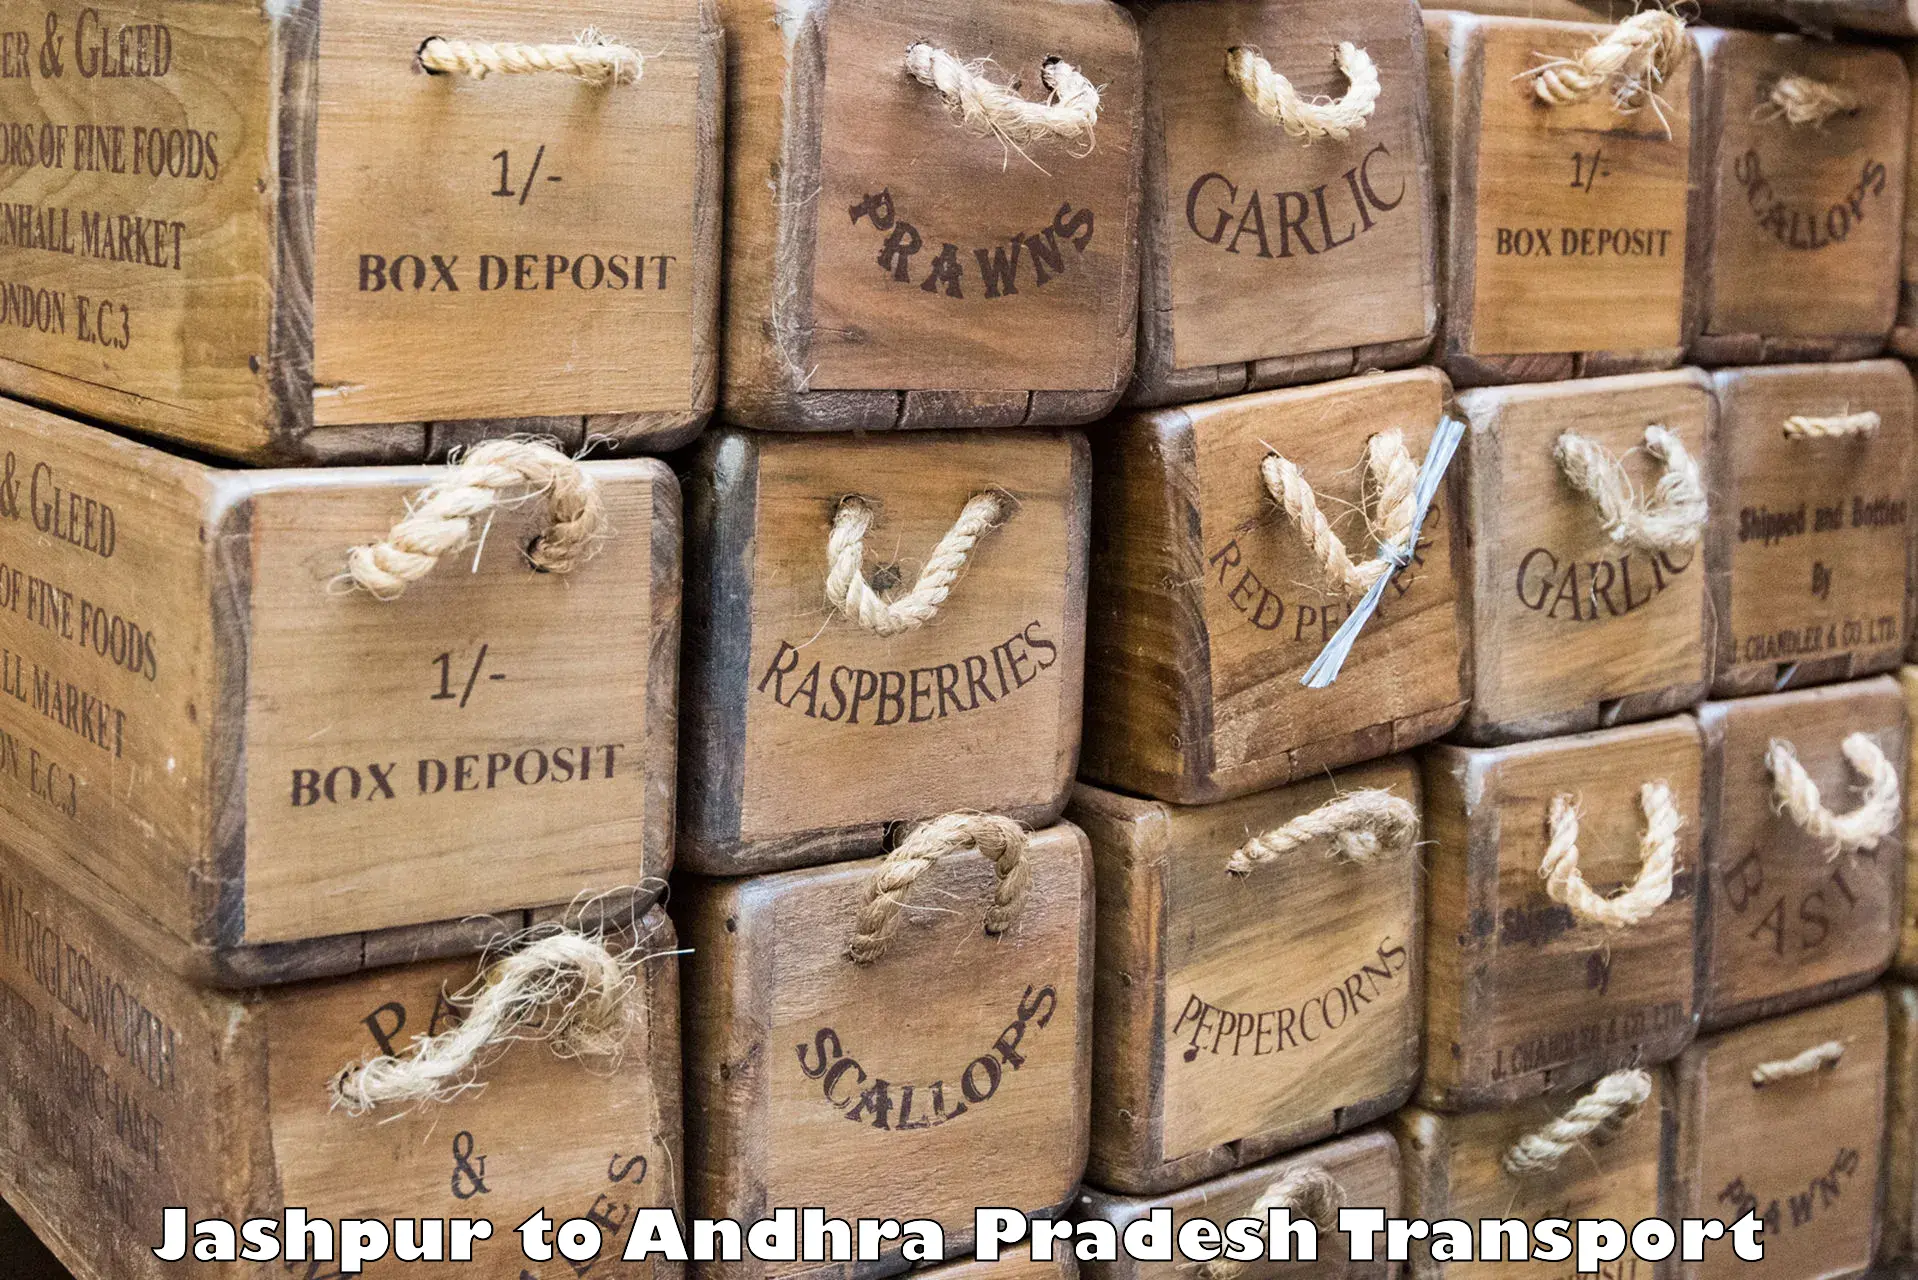 Air freight transport services in Jashpur to Nandyal